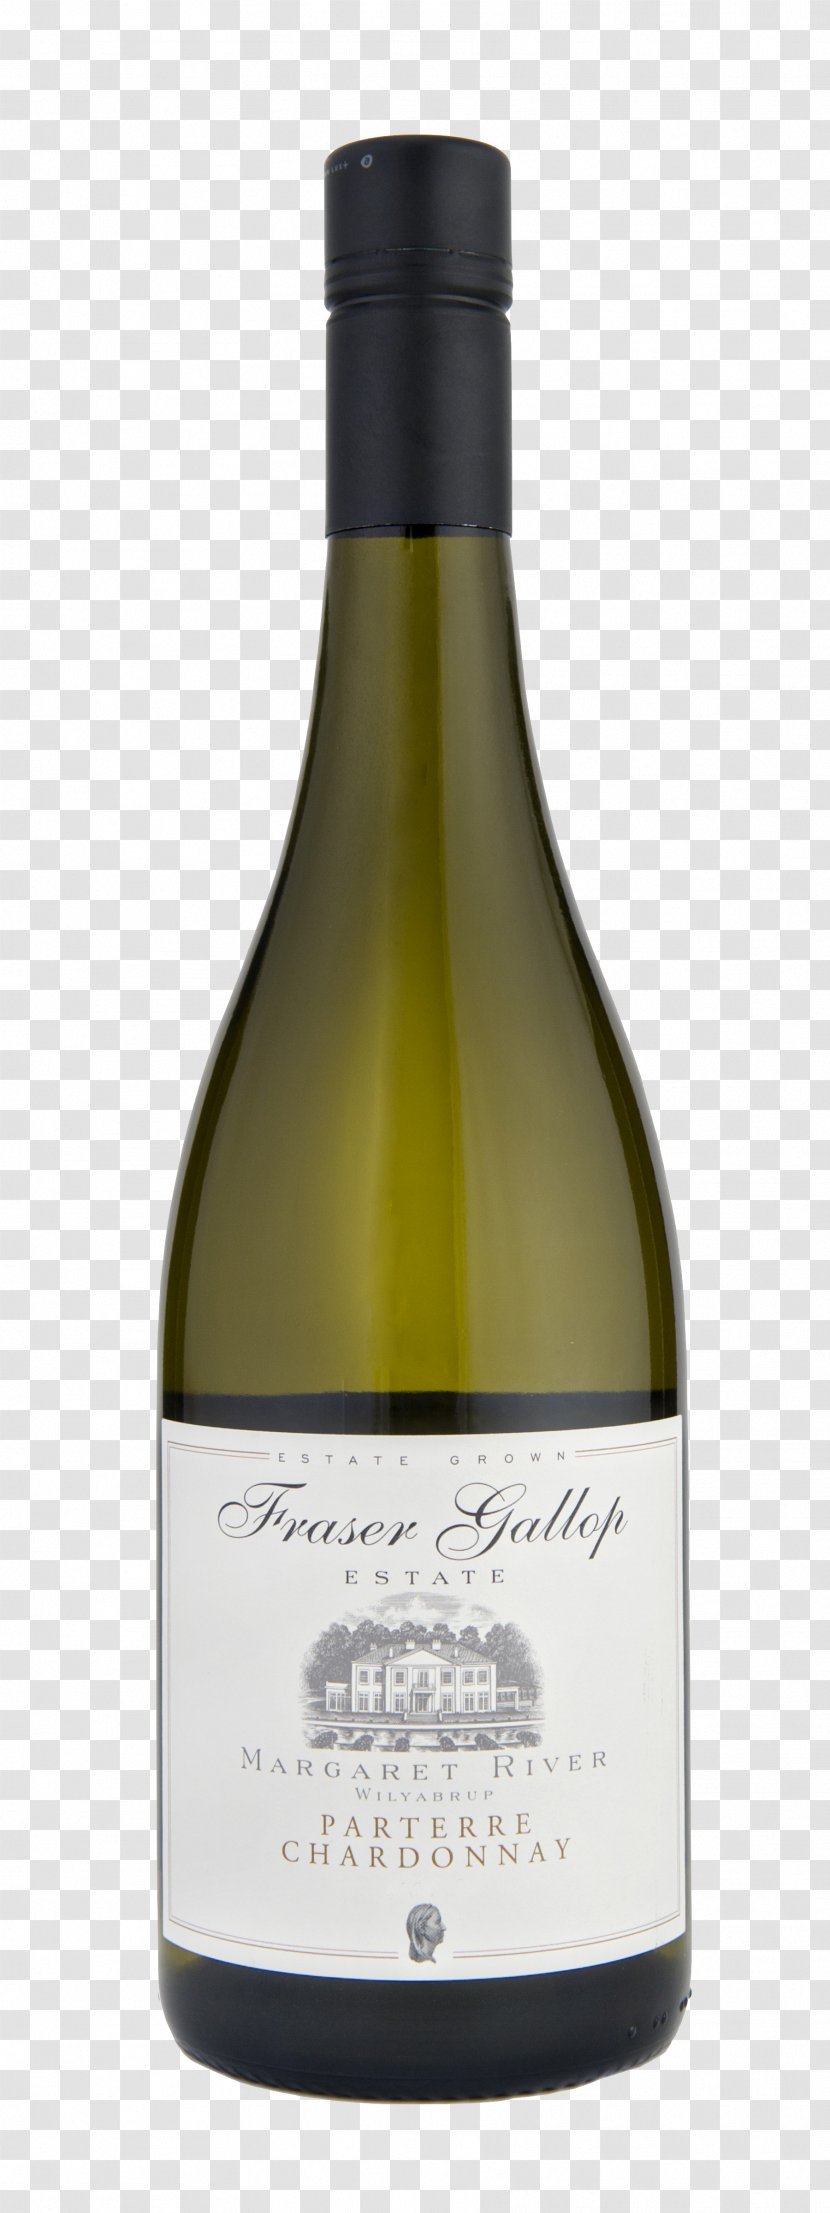 White Wine Schloss Vollrads Riesling Viognier Transparent PNG